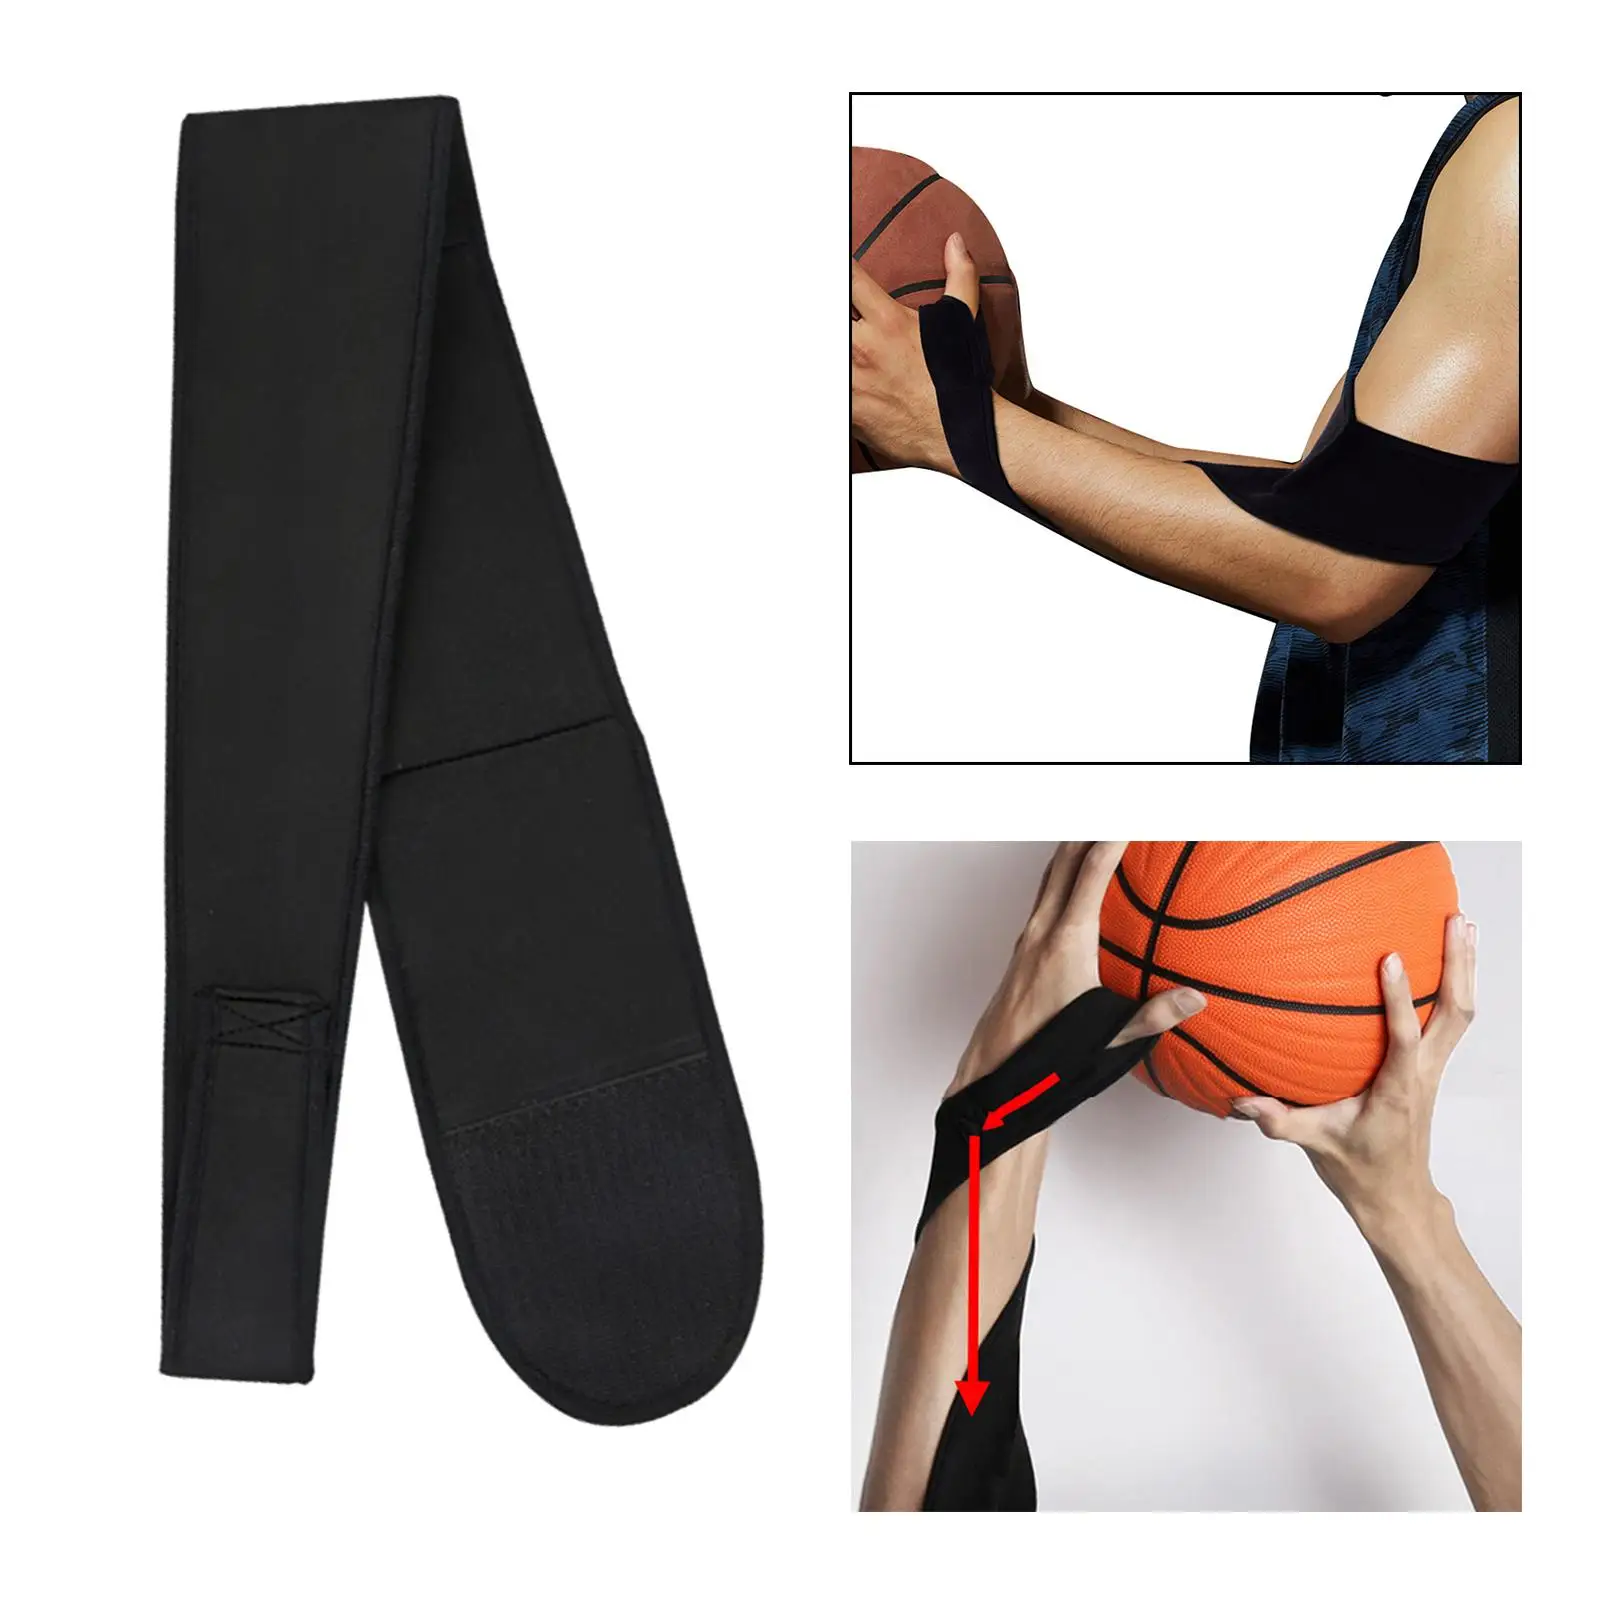 Basketball Shooting Aid Auxiliary Belt Training Portable Black Diving Fabric Durable for Hand Posture Correction Youth Adults